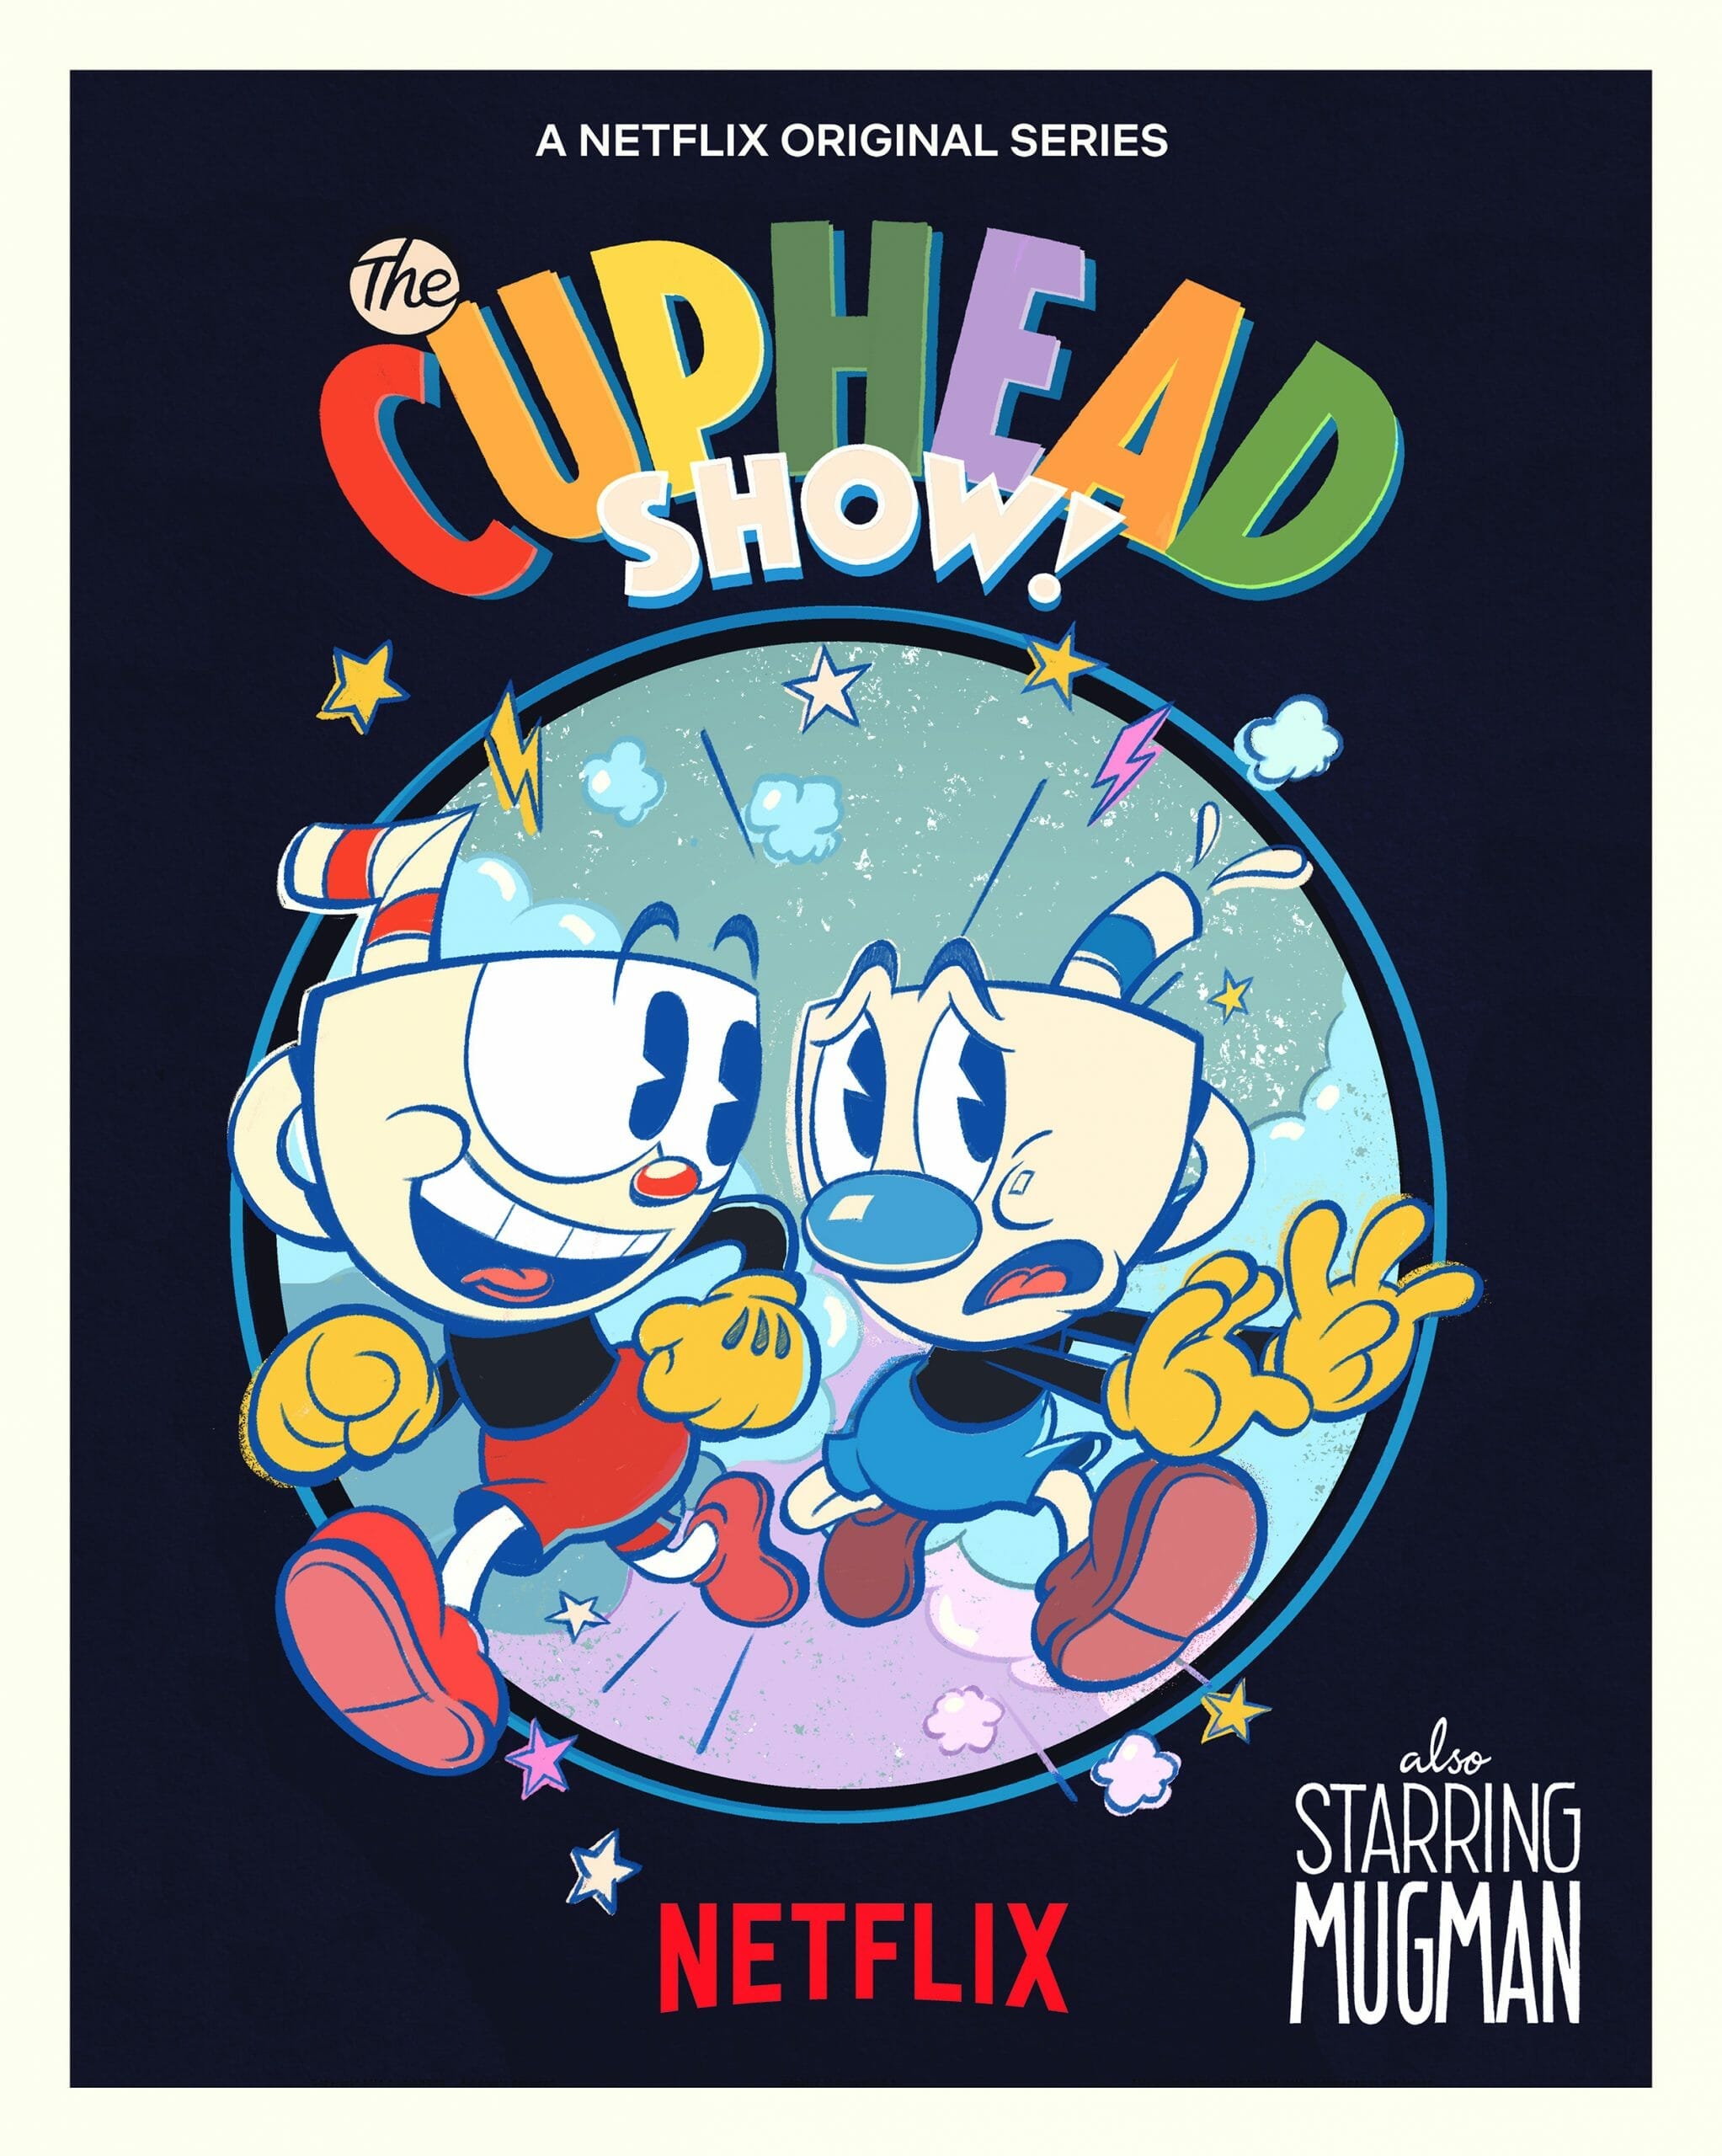 Carn-evil: The Cuphead Show promises madcap adventures in the trailer